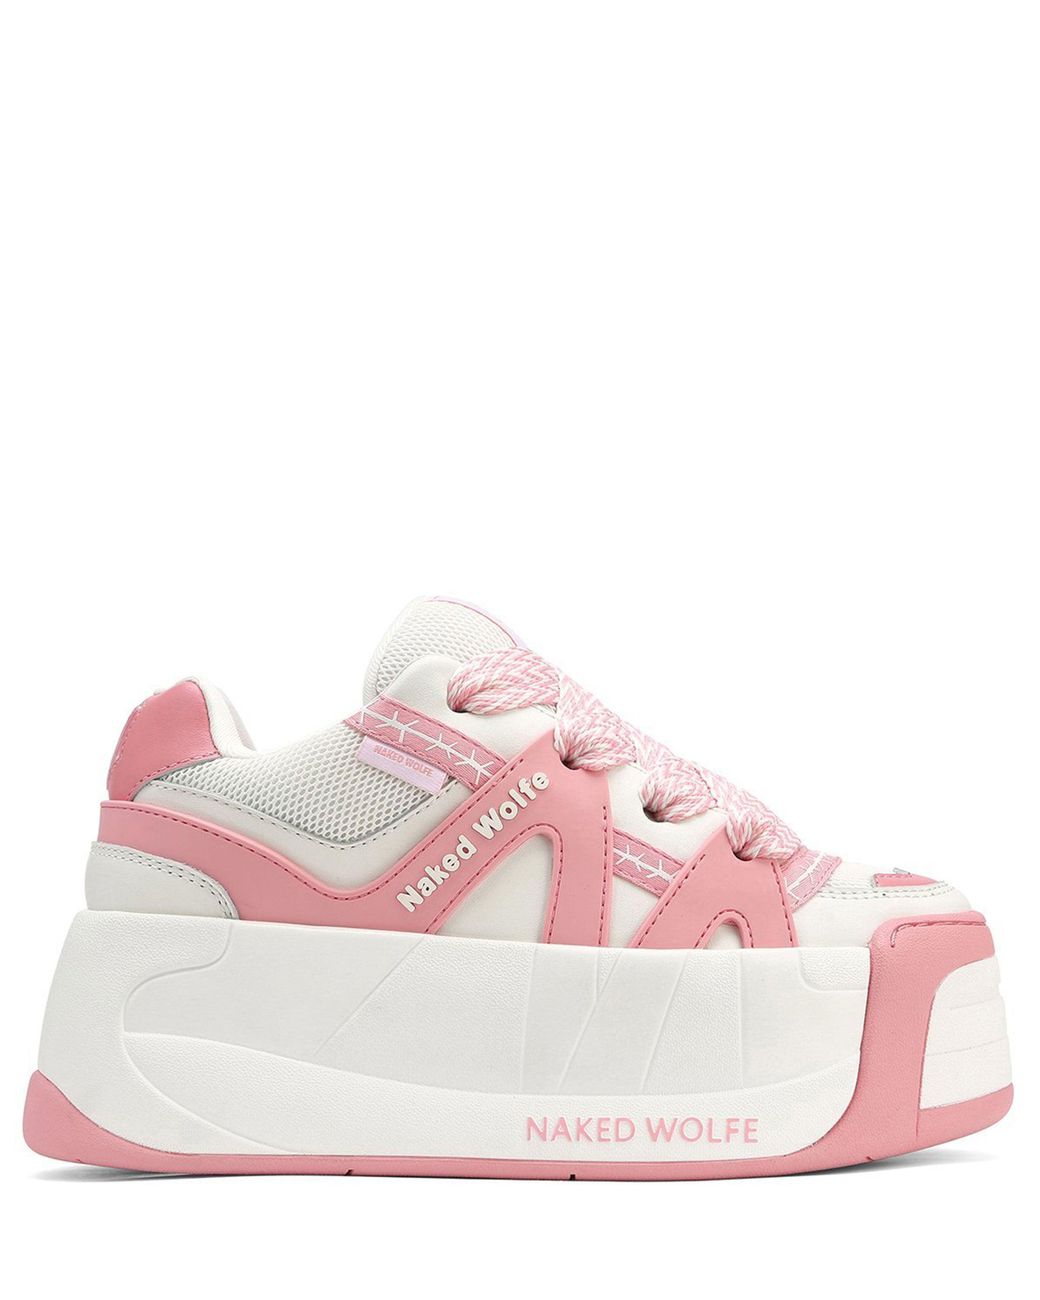 Naked Wolfe Slider Baby Pink | Lyst